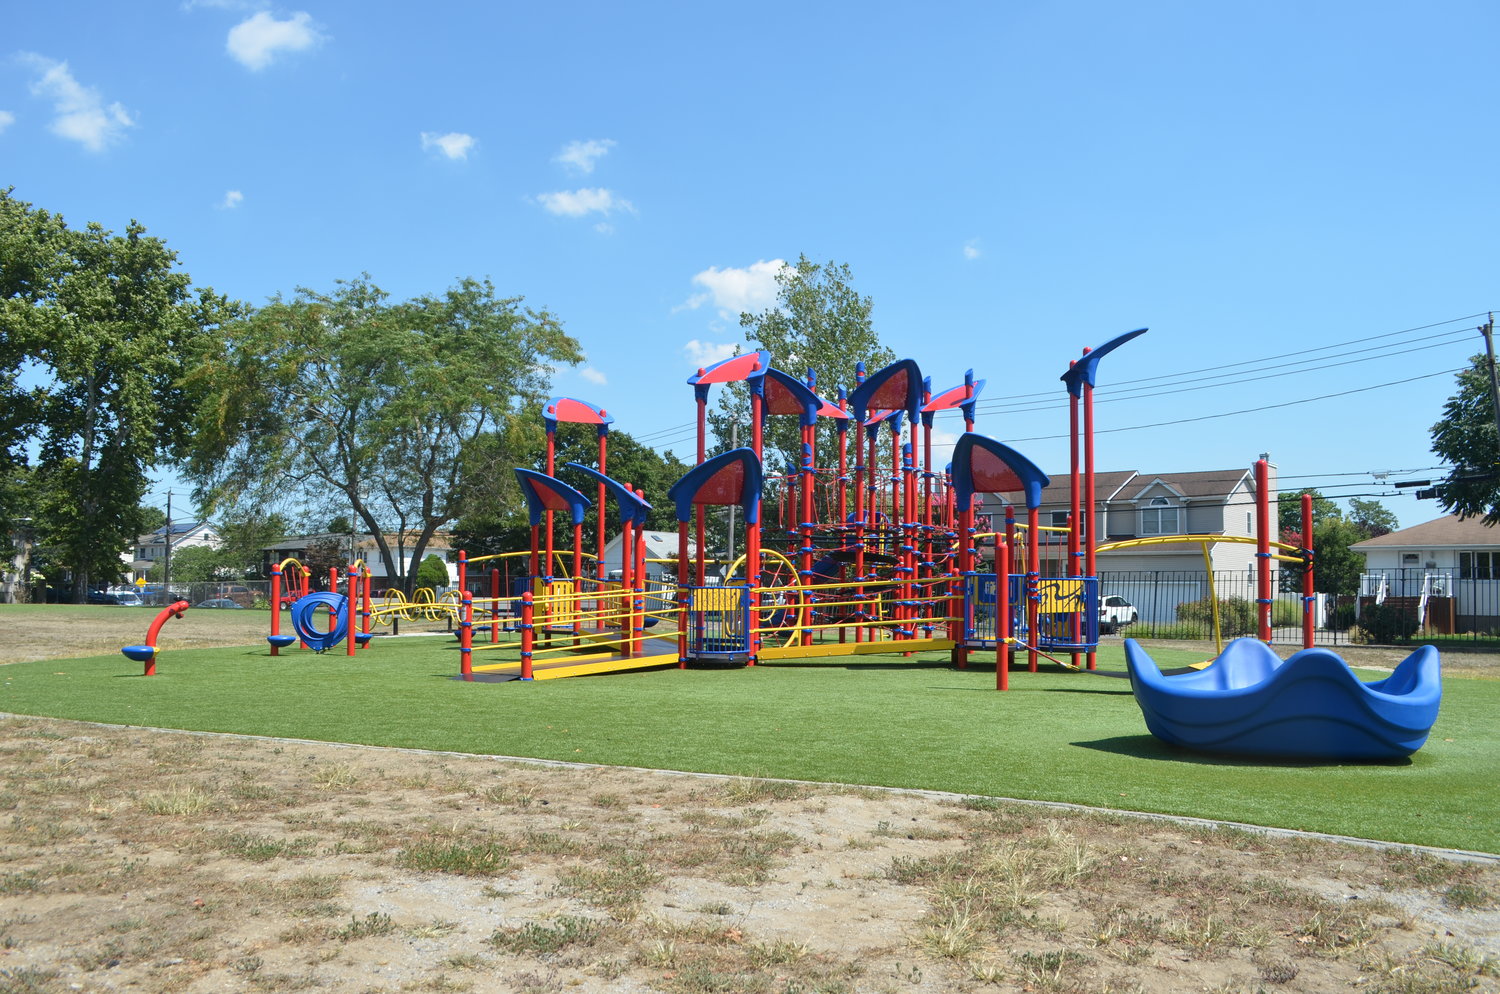 After Newbridge Road Park in South Bellmore got some upgrades last year, including a new playground, the Town of Hempstead, who maintains the recreational facility, announced more renovations are on the way. The new play area, above, opened for public use last spring.